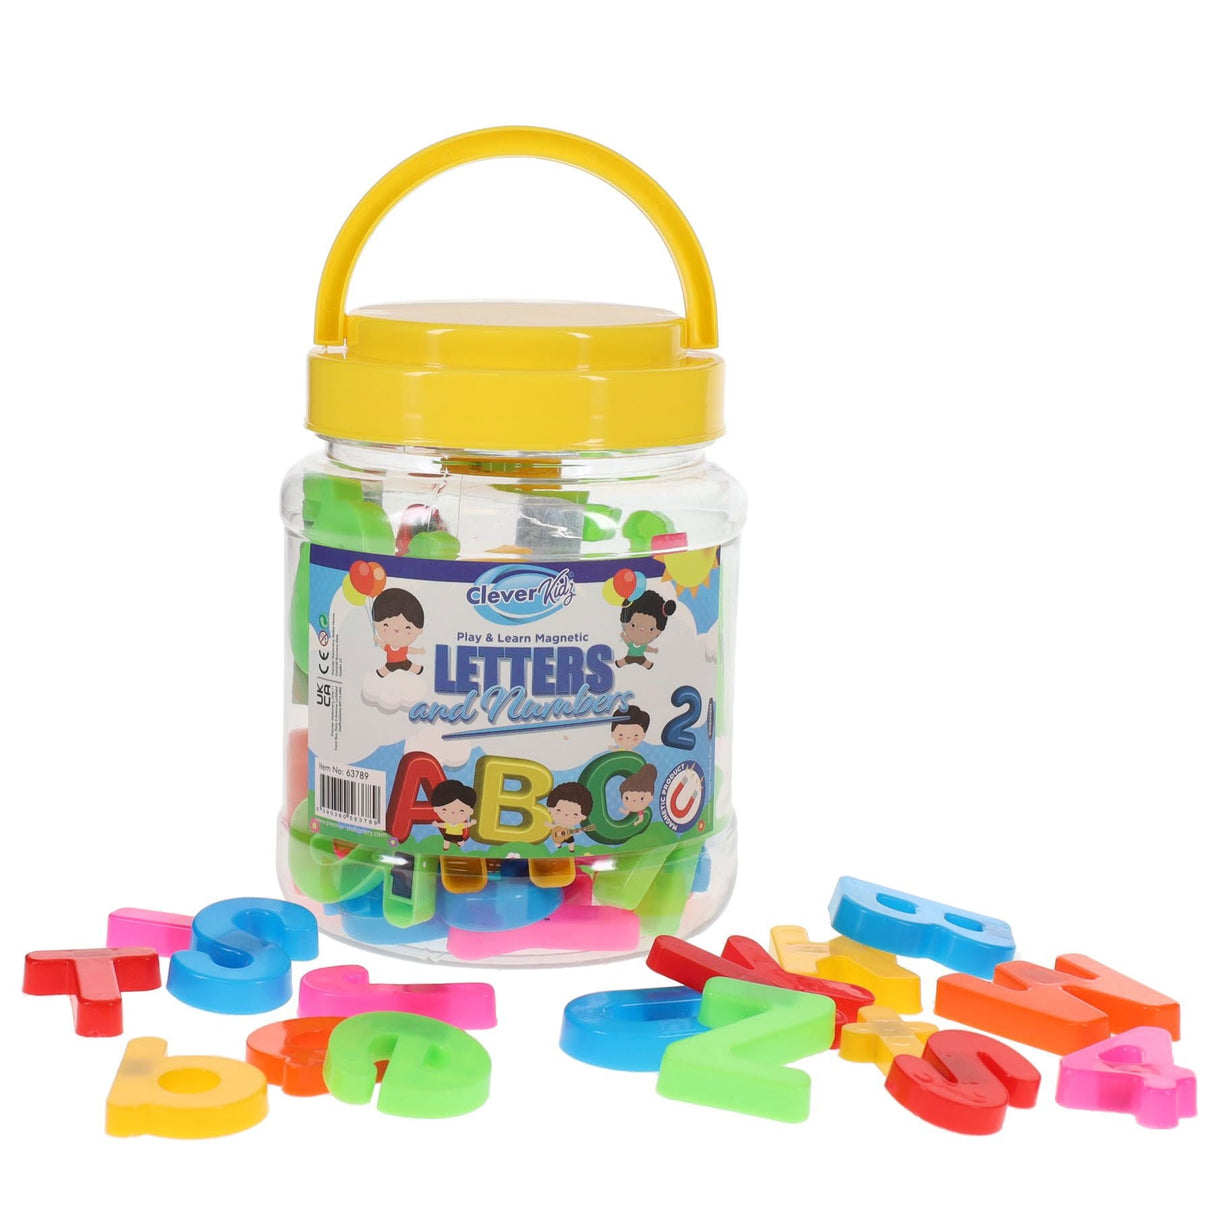 Clever KidszTub 68 Magnetic Abc Letters & Numbers | Stationery Shop UK